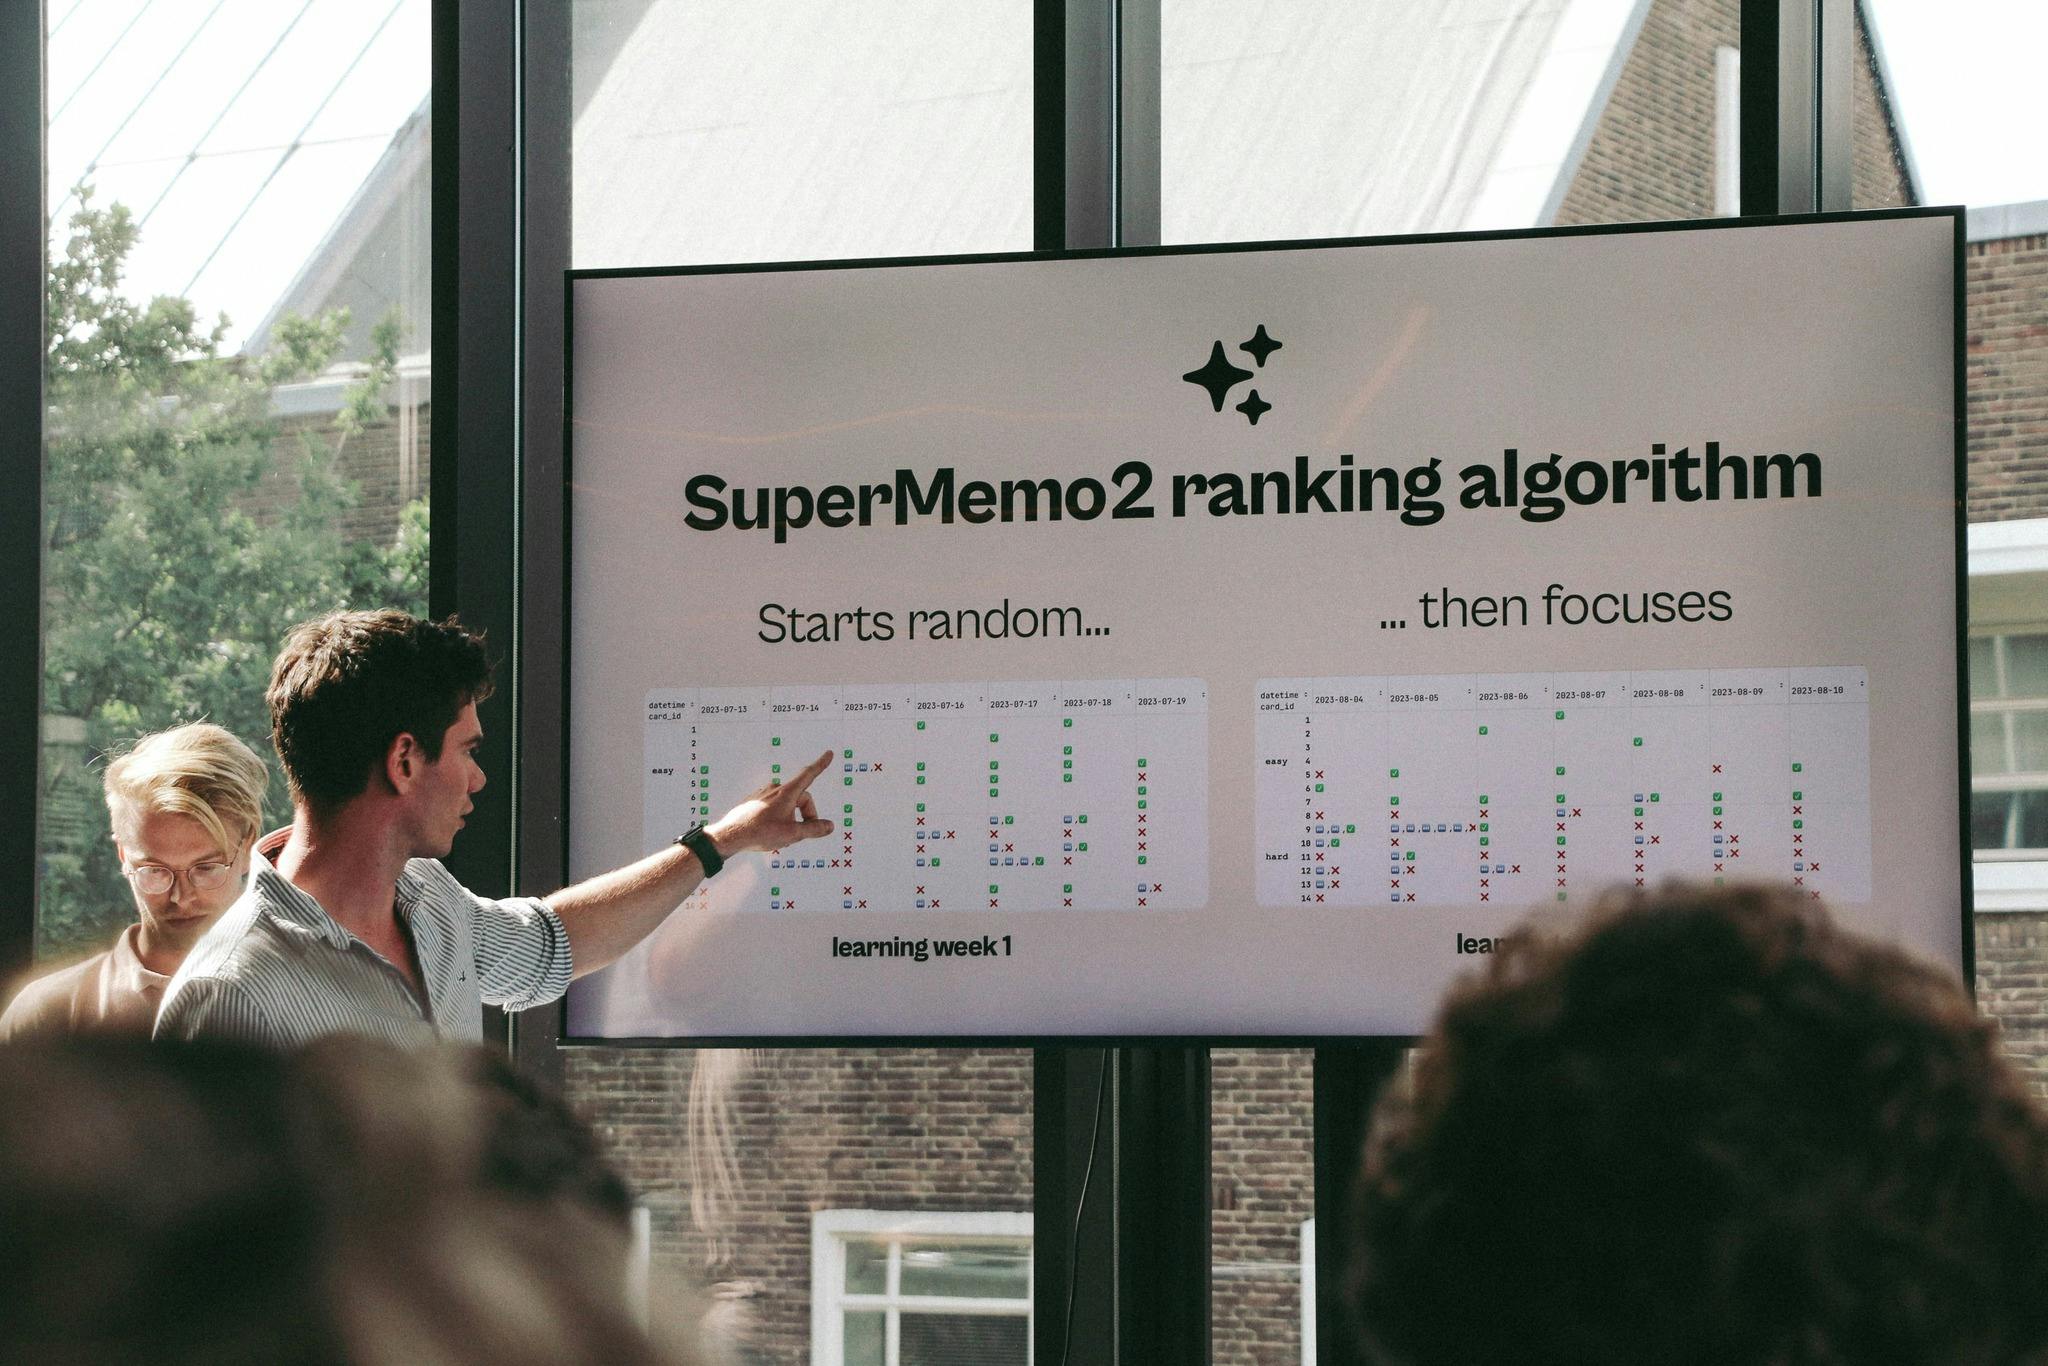 A picture of Leon pointing to a big television screen. On the screen, our pitch deck is showing a slide titled “SuperMemo2 ranking algorithm” with two columns of data: “Starts random…” and “…then focuses”.